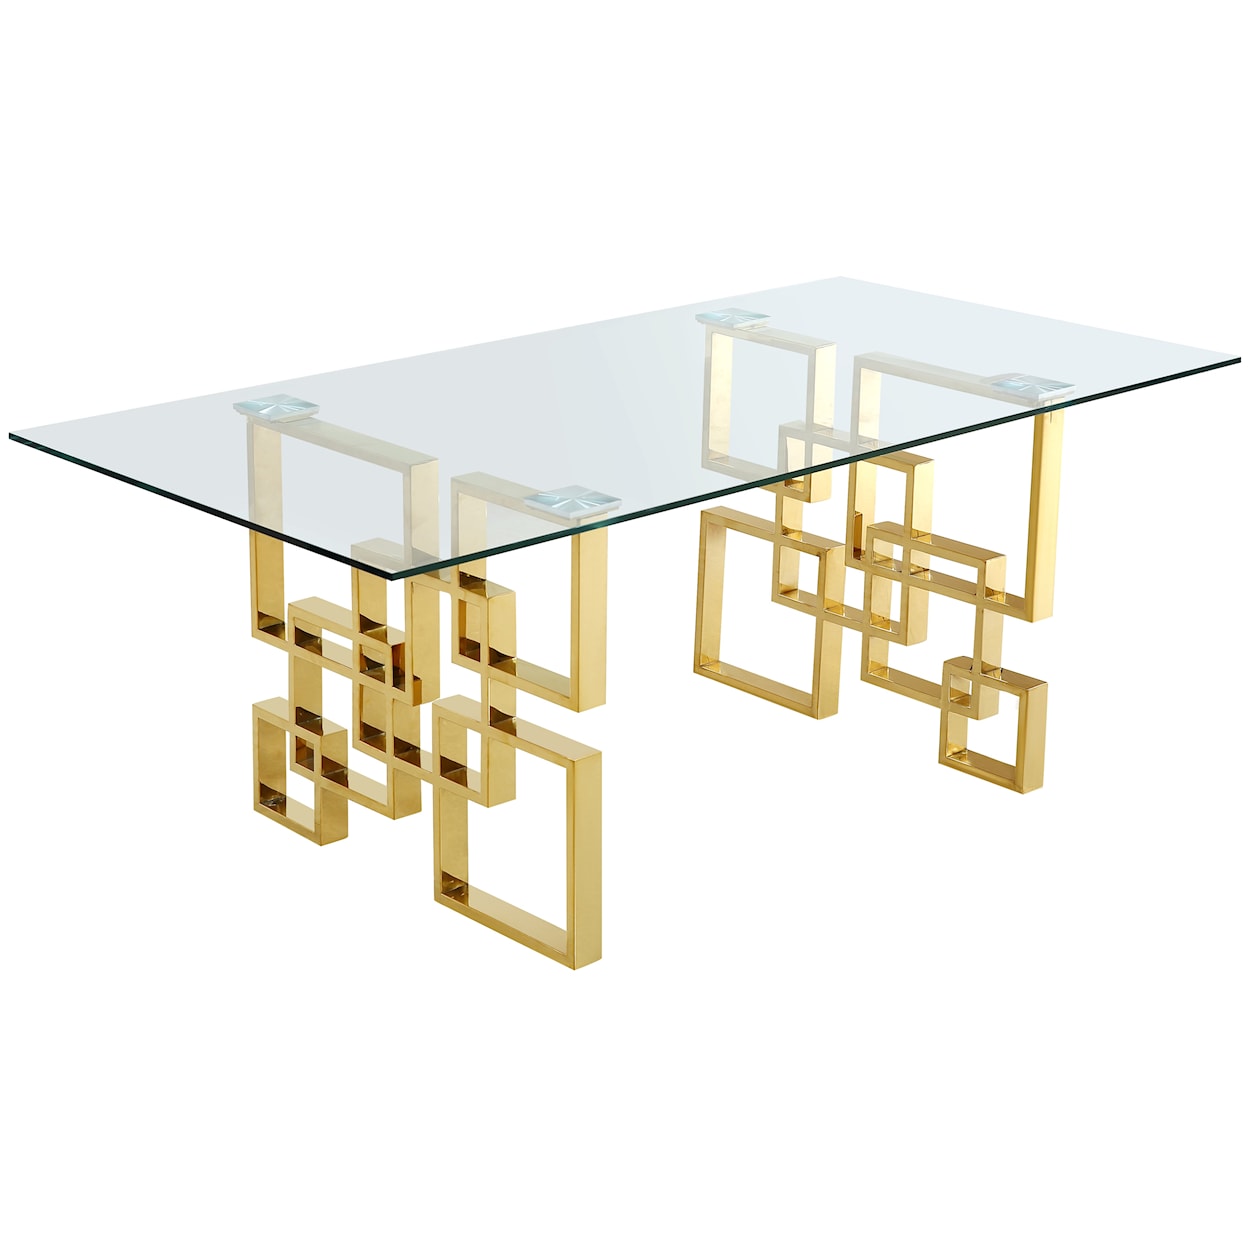 Meridian Furniture Pierre Dining Table